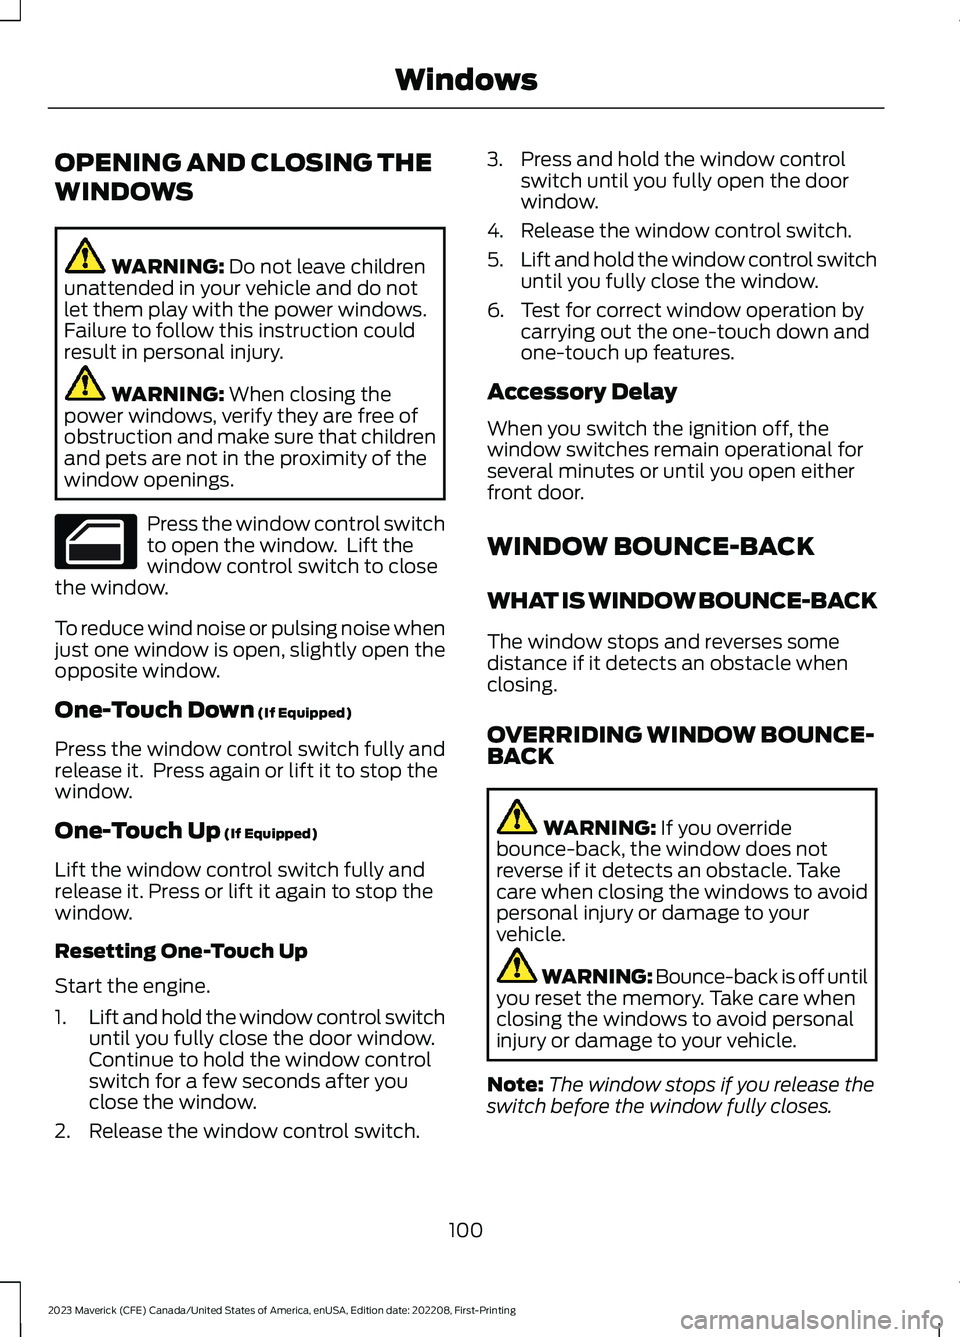 FORD MAVERICK 2023  Owners Manual OPENING AND CLOSING THE
WINDOWS
WARNING: Do not leave childrenunattended in your vehicle and do notlet them play with the power windows.Failure to follow this instruction couldresult in personal injur